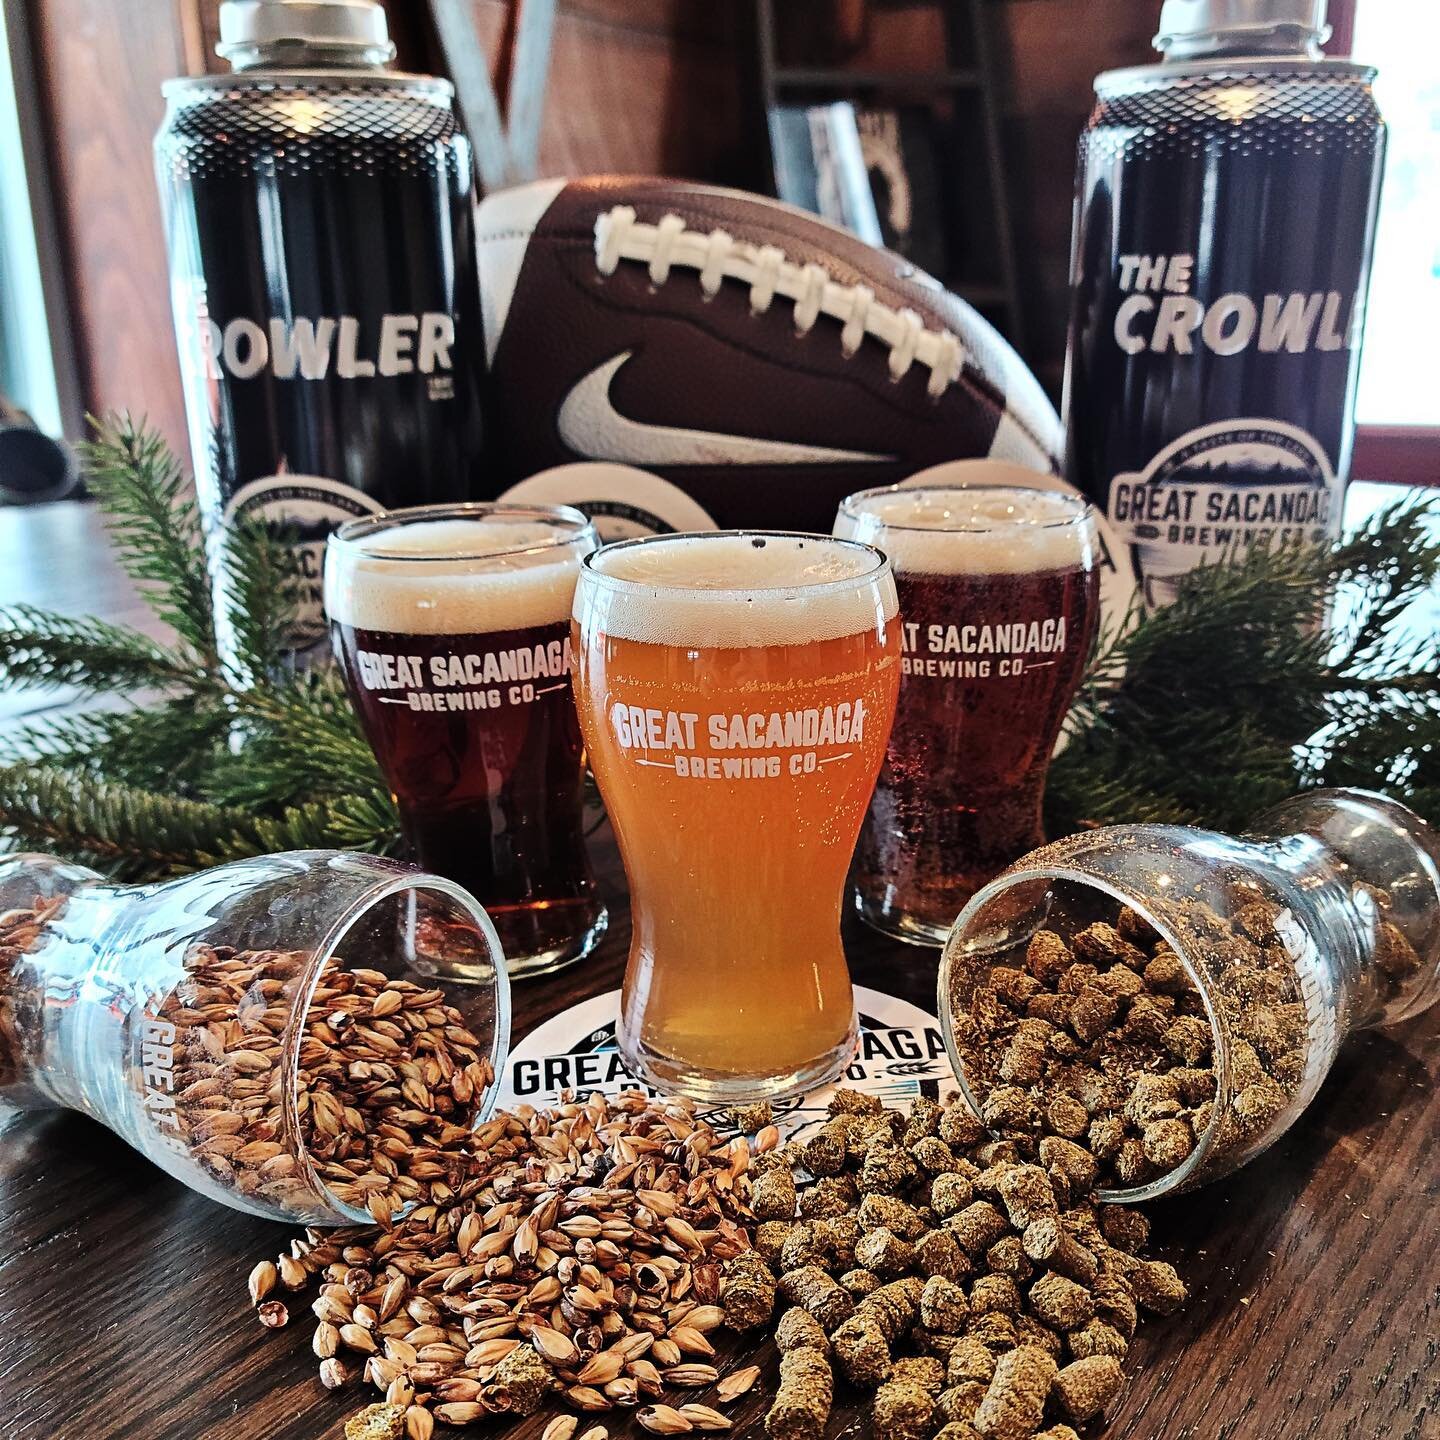 This Superbowl Sunday! Pick up crowlers to go for your game day party! We will also have our signature pretzels and pizzas to go! 

#ATasteOfTheLake #GreatSacandagaLake #GSBC #Beer #GreatSacandagaBrewingCompany #LakeLife #Brewing #Brewery #GreatSacan